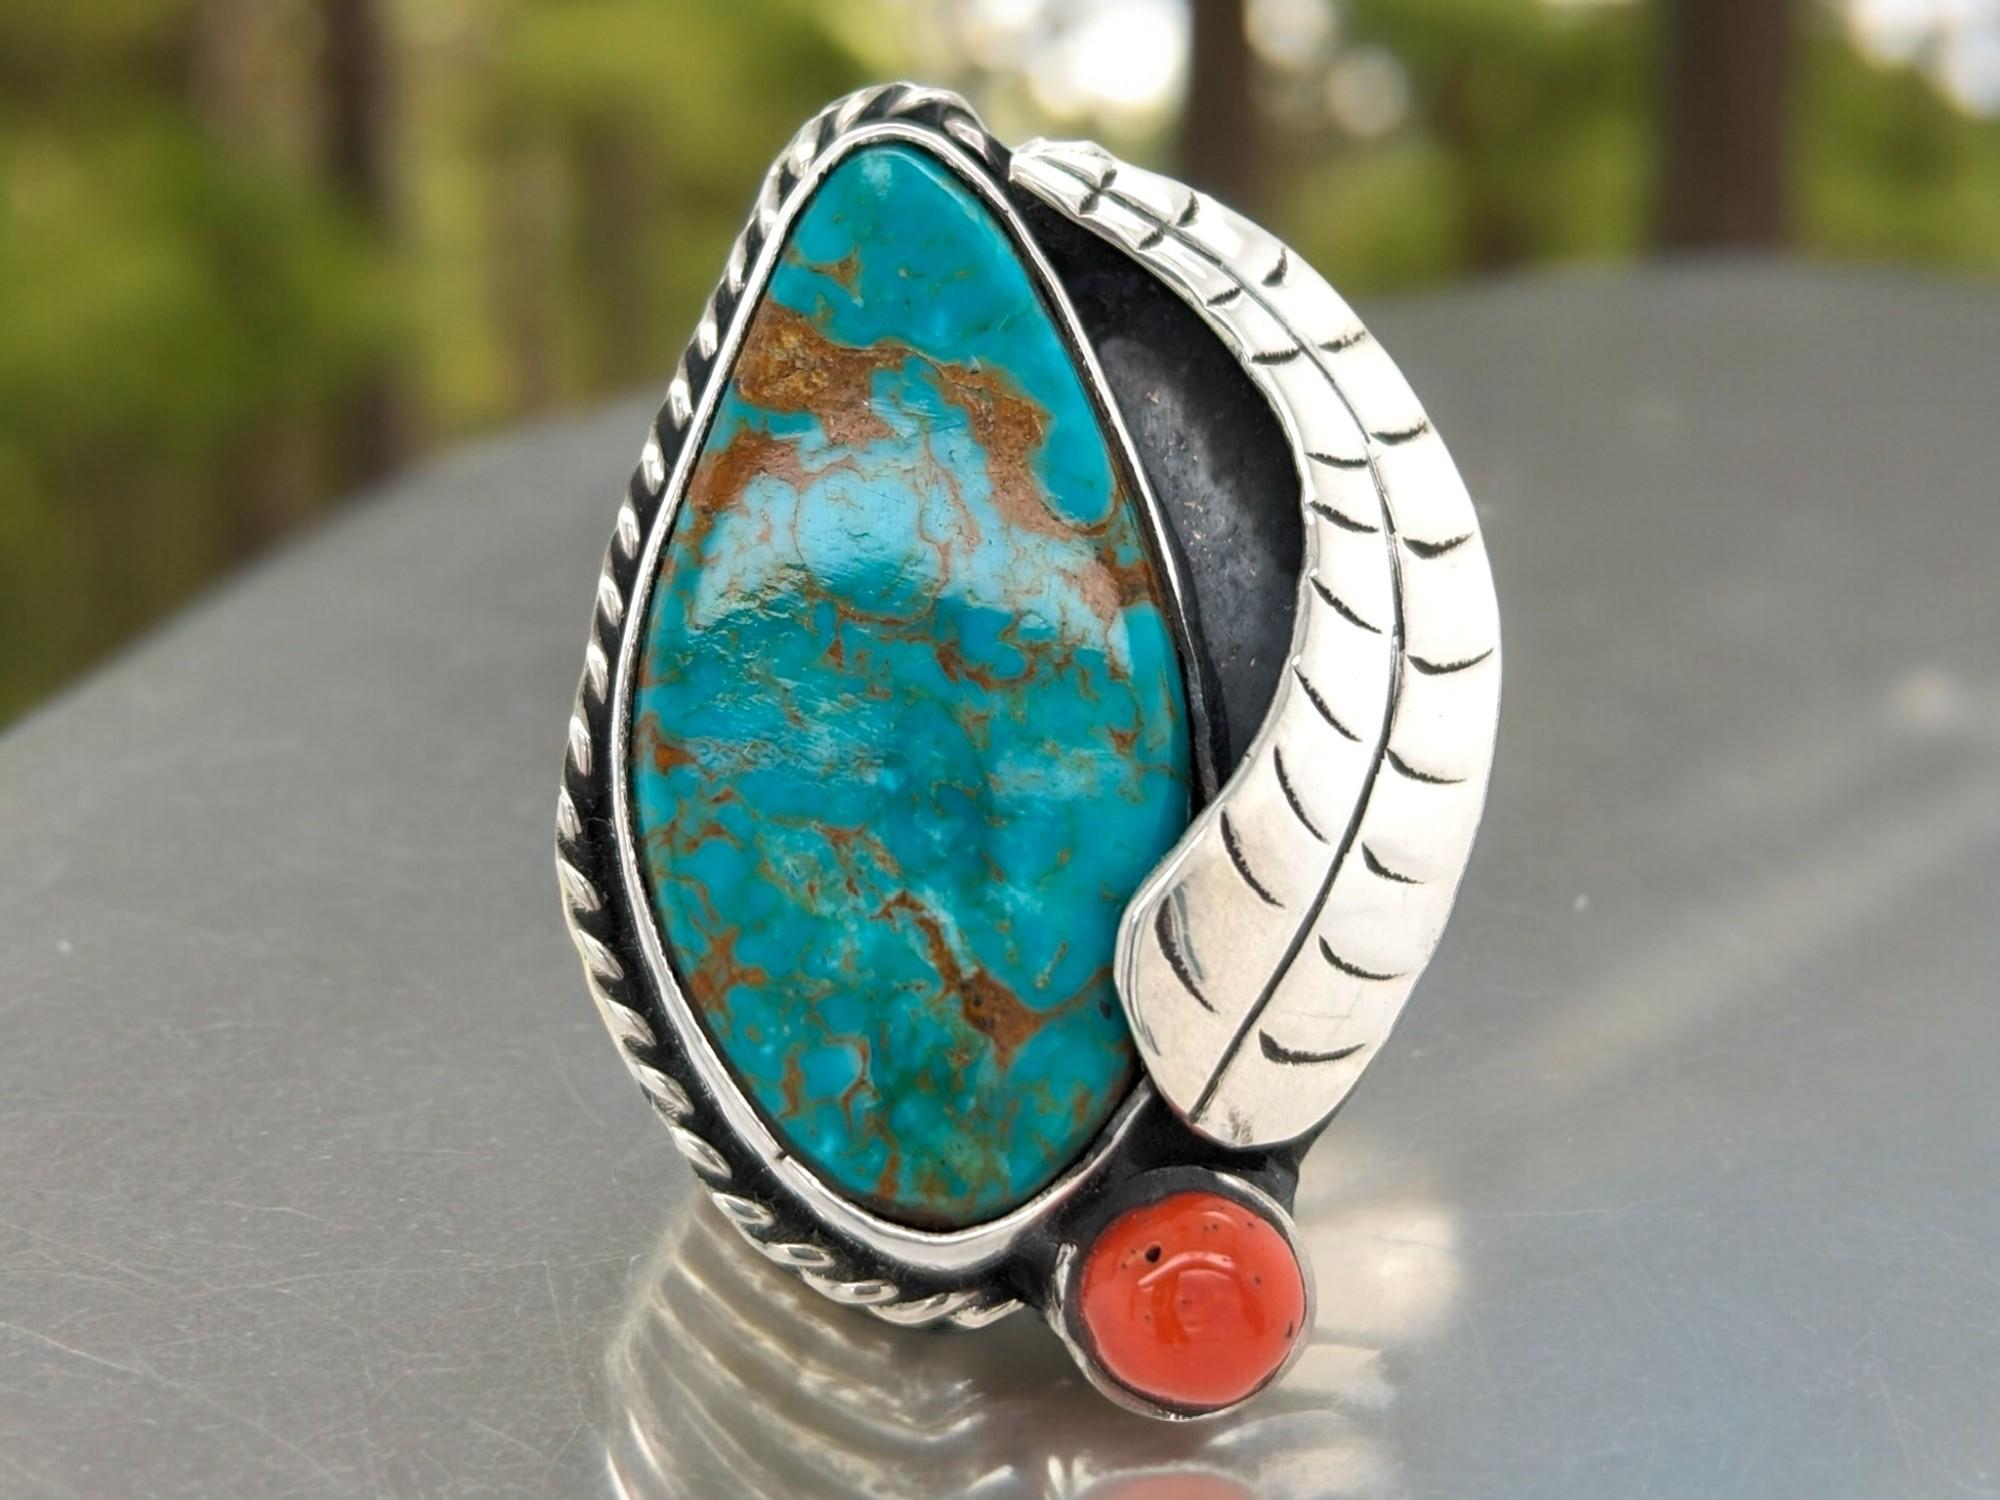 Embrace the vibrancy of nature with this stunning Turquoise & Red Coral Ring. Handcrafted in gleaming silver, this ring features a captivating combination of genuine turquoise and fiery red coral gemstones.

Unique Gemstone Pairing: The contrasting